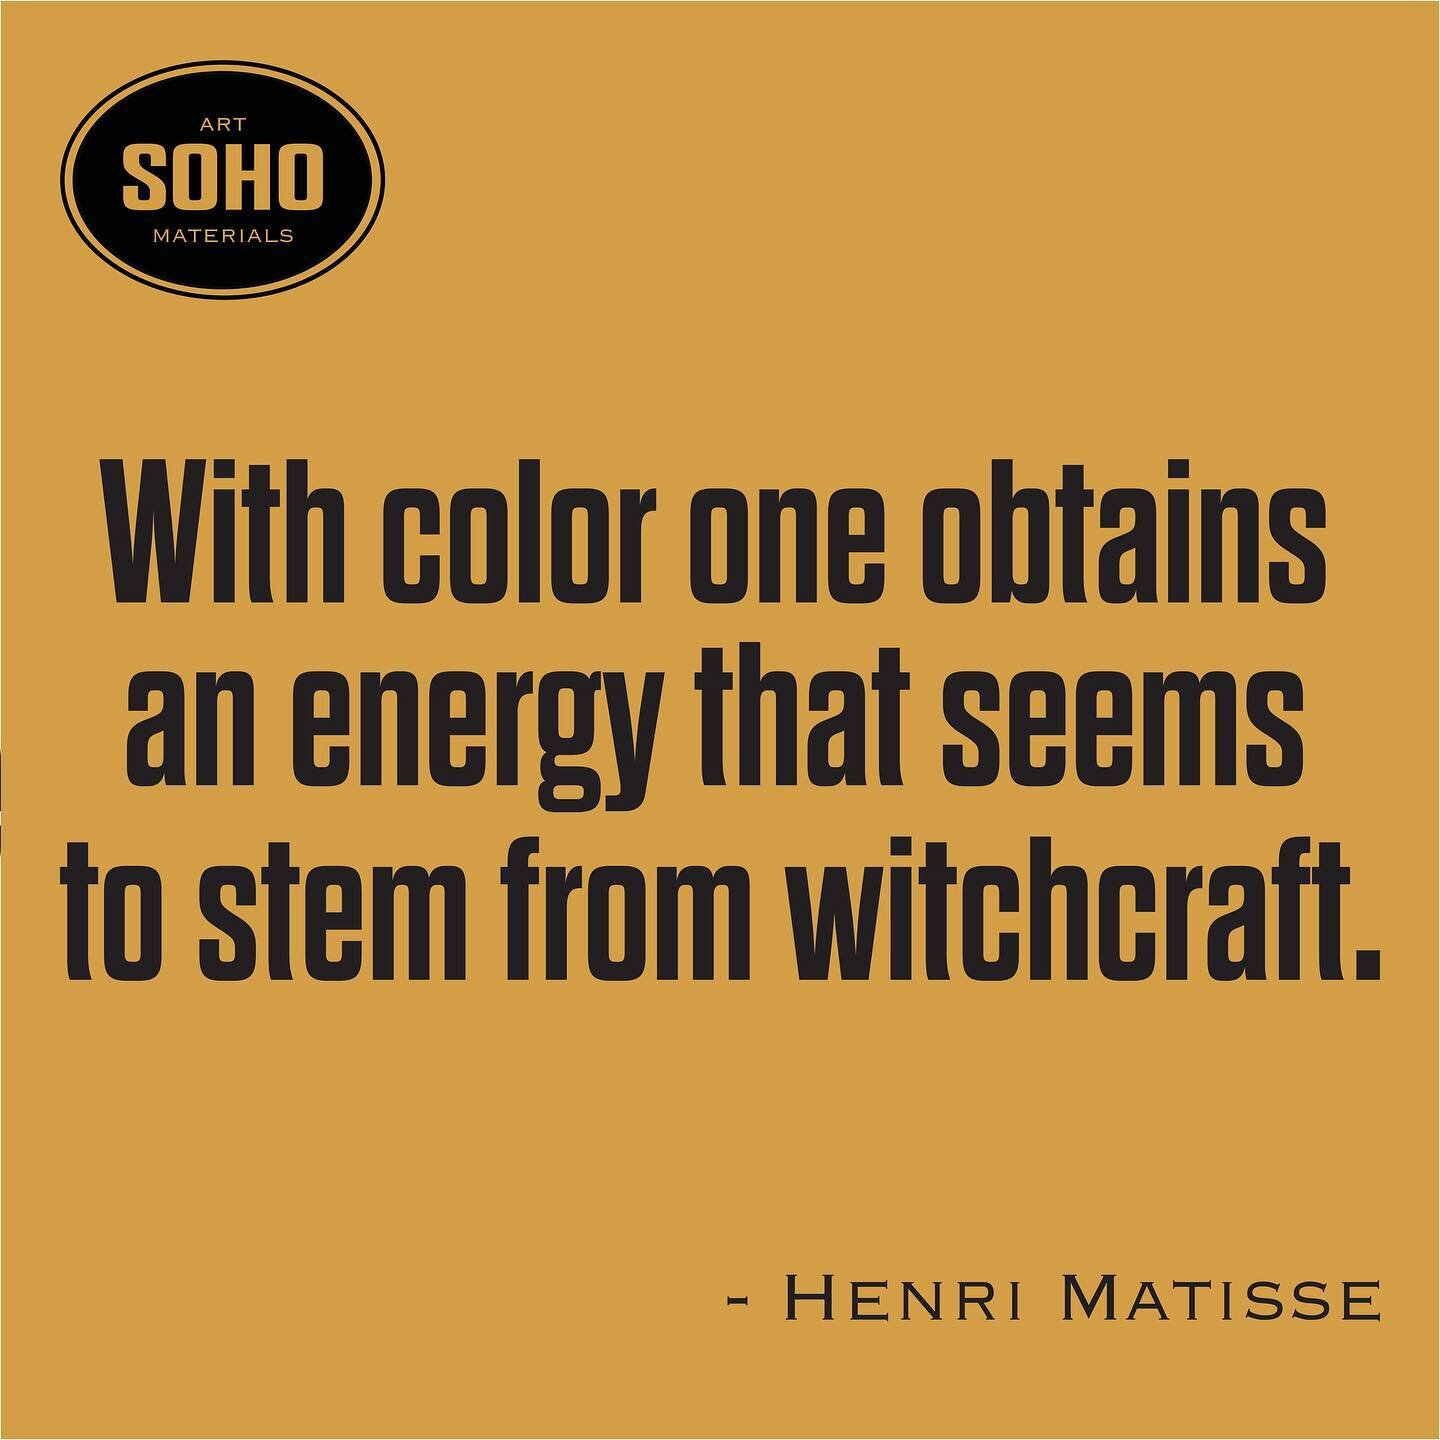 The power of color is undeniable, Matisse knew that very well.  What is your color of the day?
.
.
.
#sohoartmaterials #colorshop #artmaterials #liveincolor #matisse #henrimatisse #artistquotes #powerofcolors #independentretailer